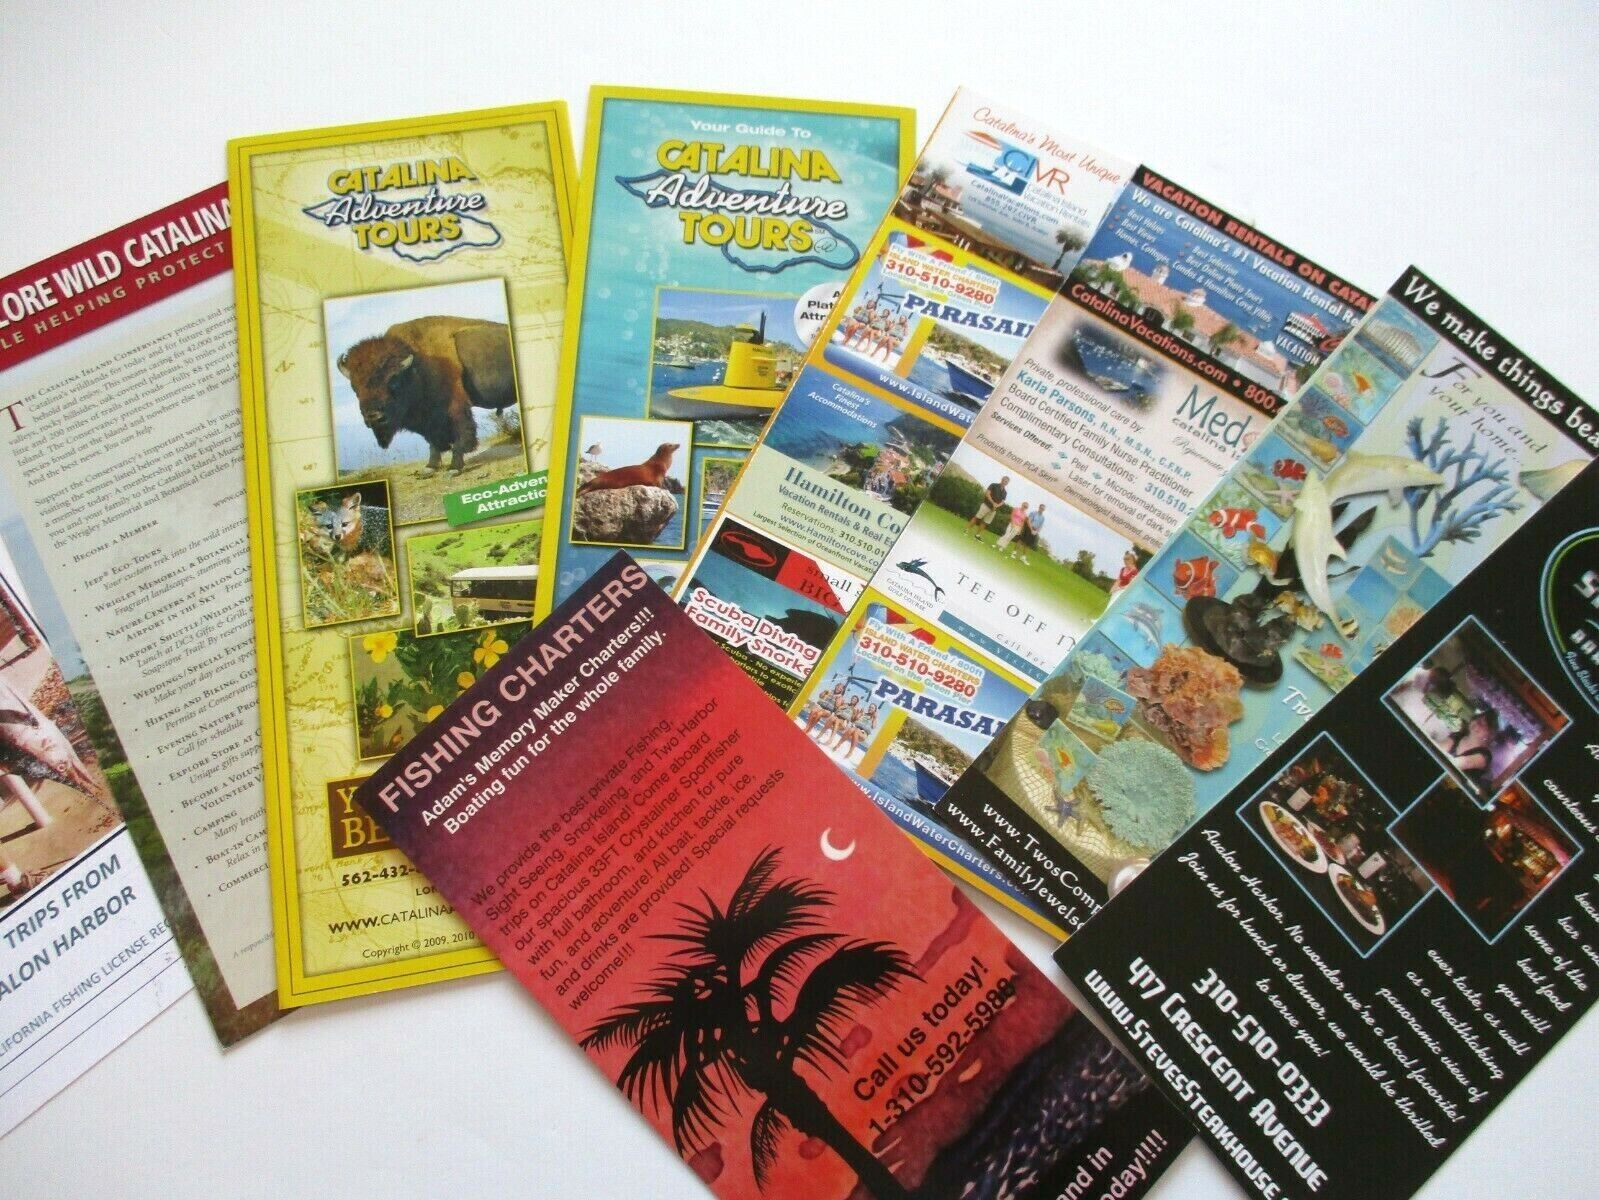 CATALINA ISLAND 2010-2012 NEW 13 BROCHURES MAPS ATTRACTIONS INFO DETAILS #A13